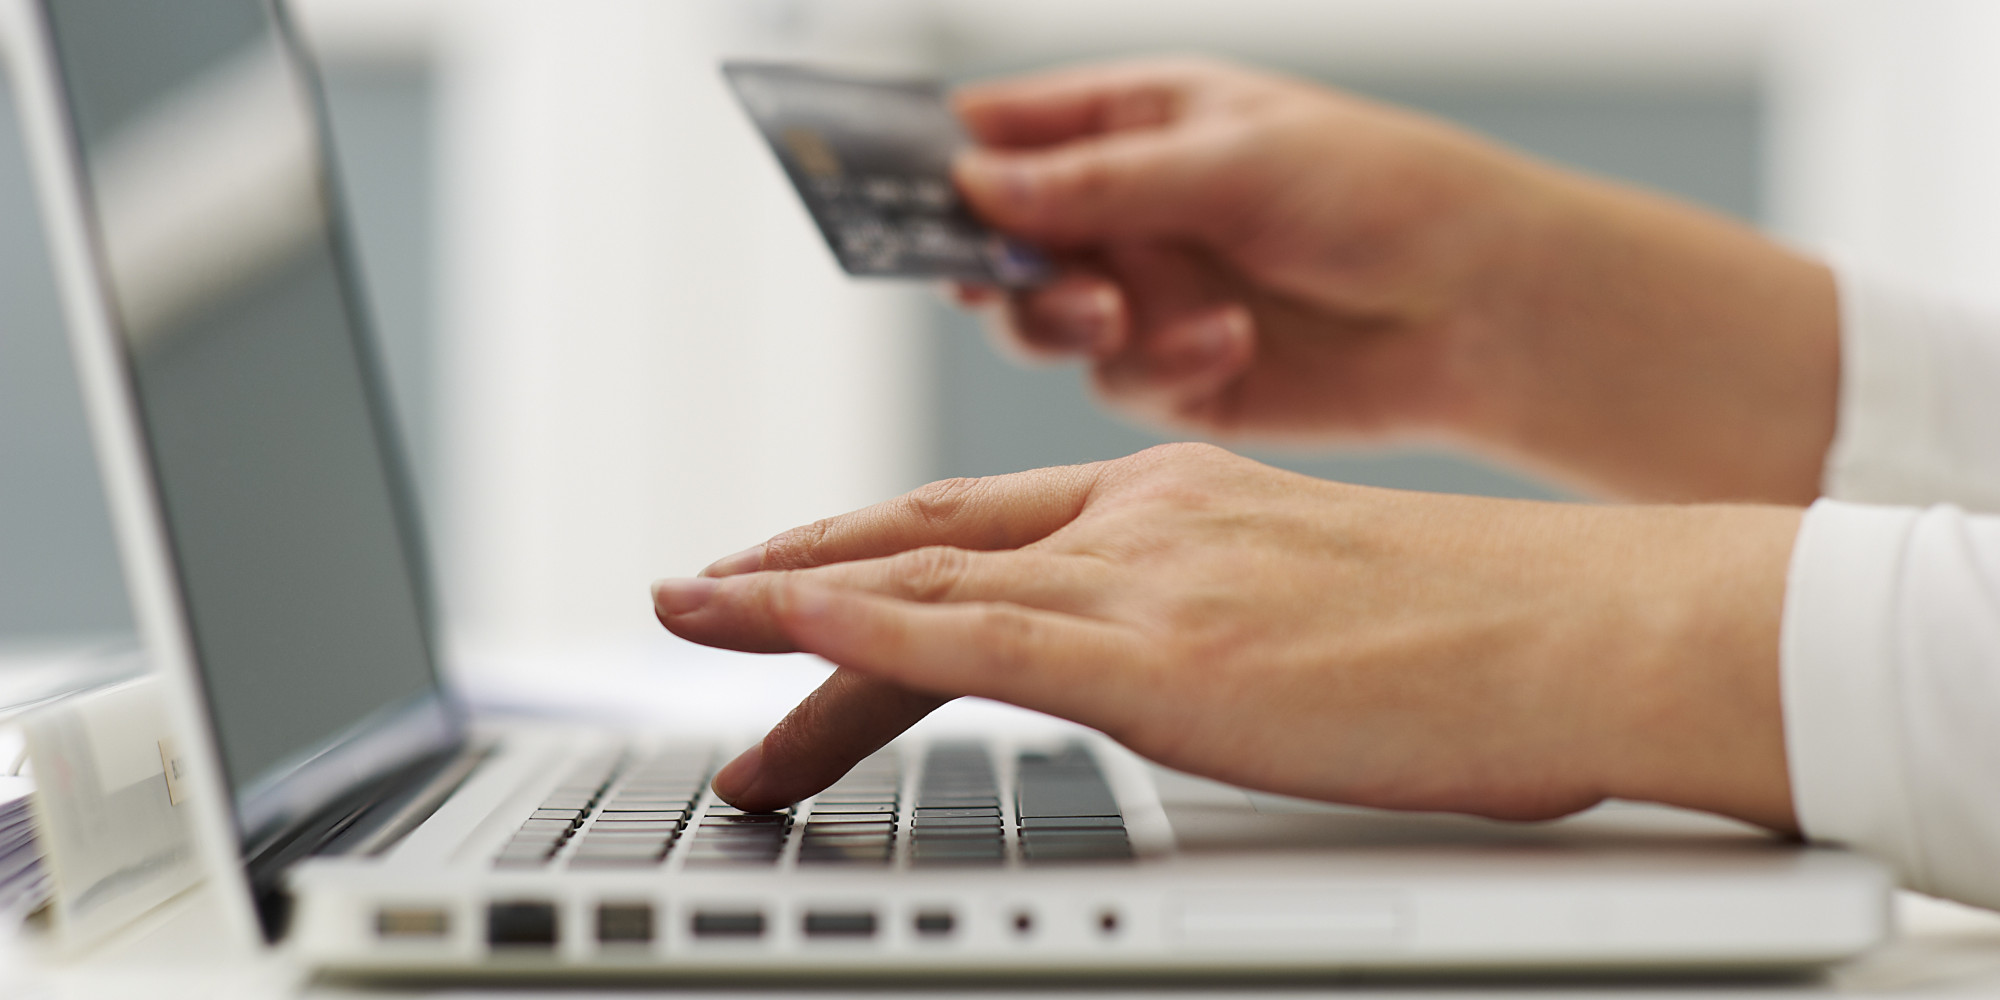 Mistakes To Avoid When Shopping Online